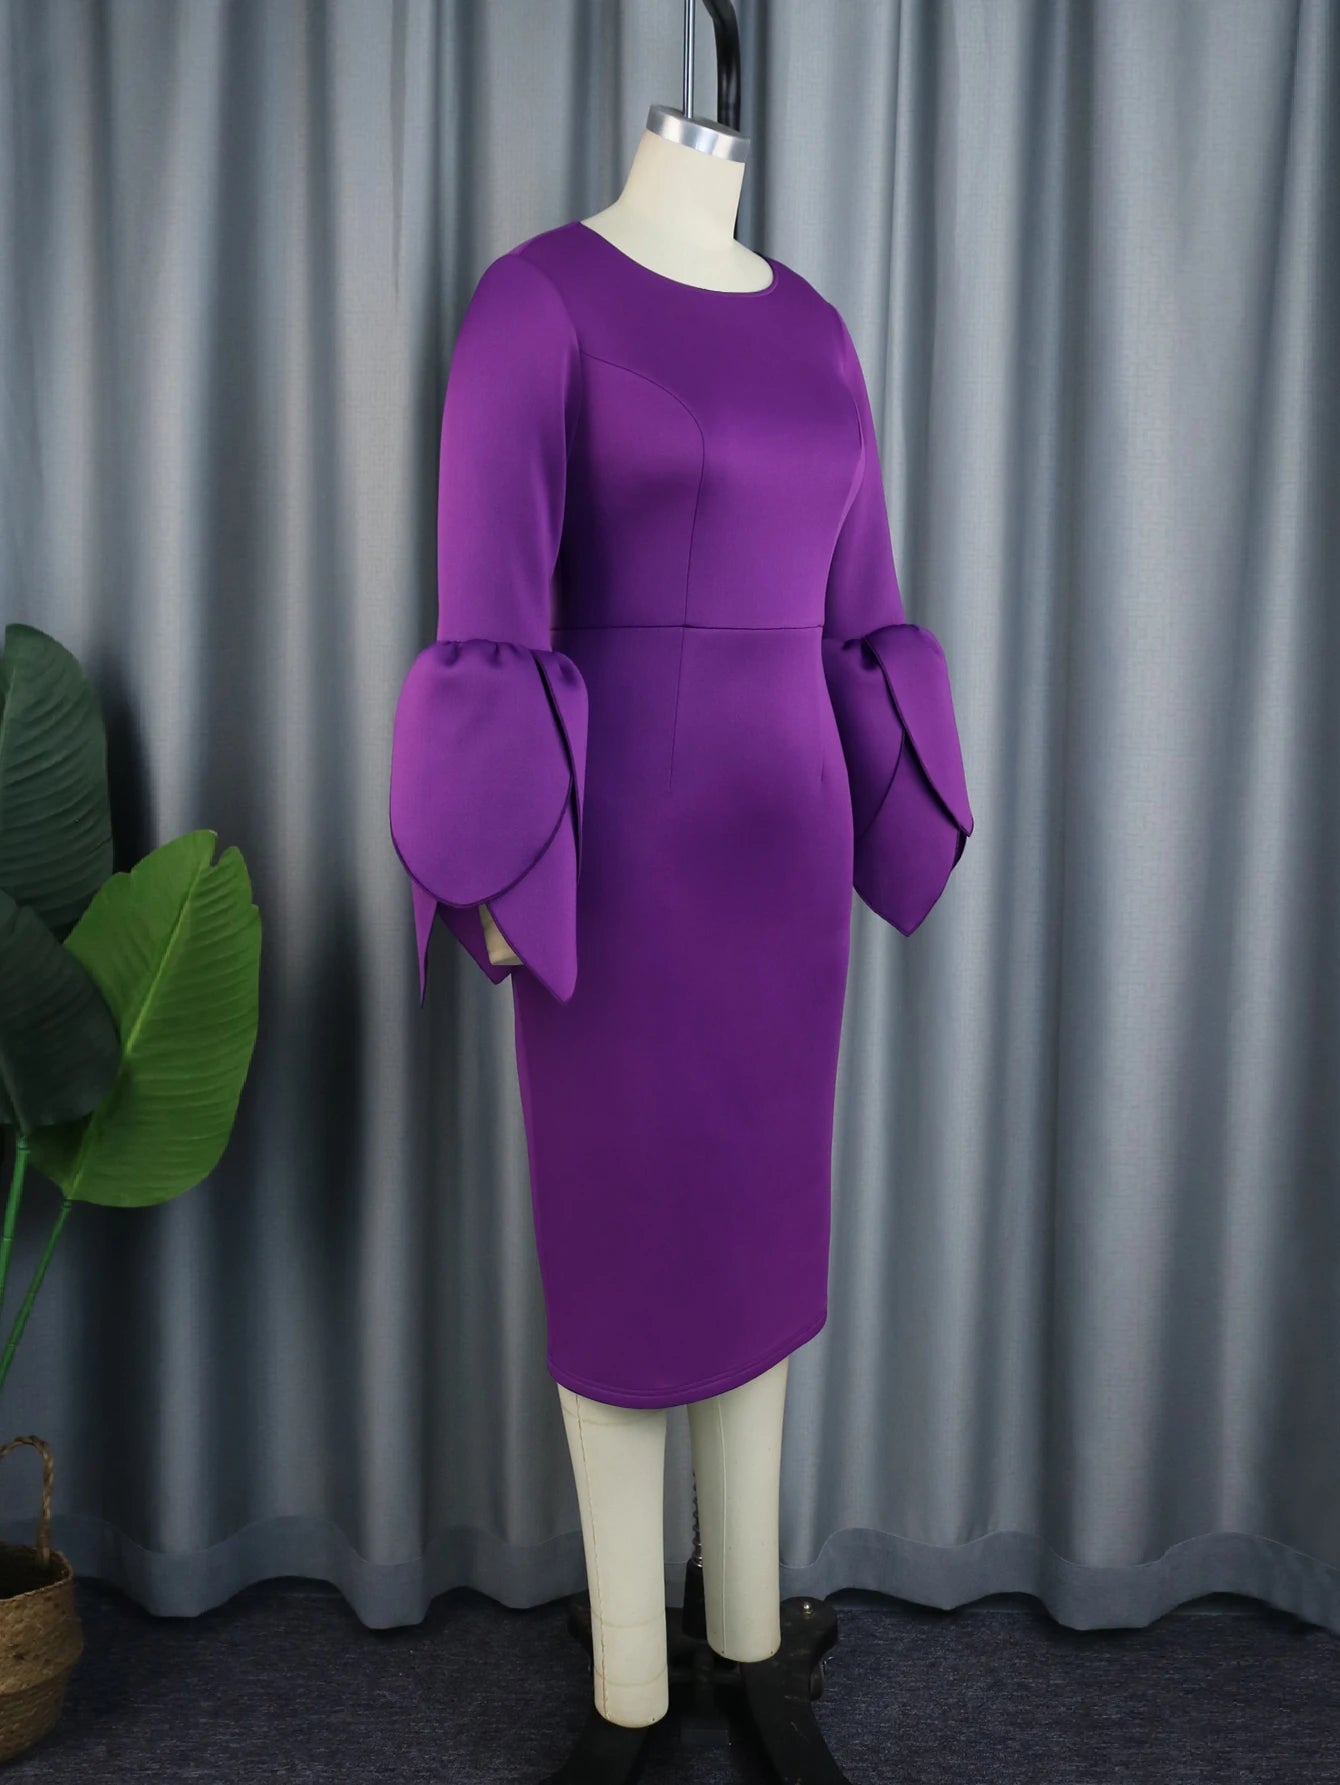 Purple Midi Dresses for Women Plus Size O Neck Long Ruffles Sleeve Elegant Formal Occasion Birthday Wedding Guest Evening Gowns